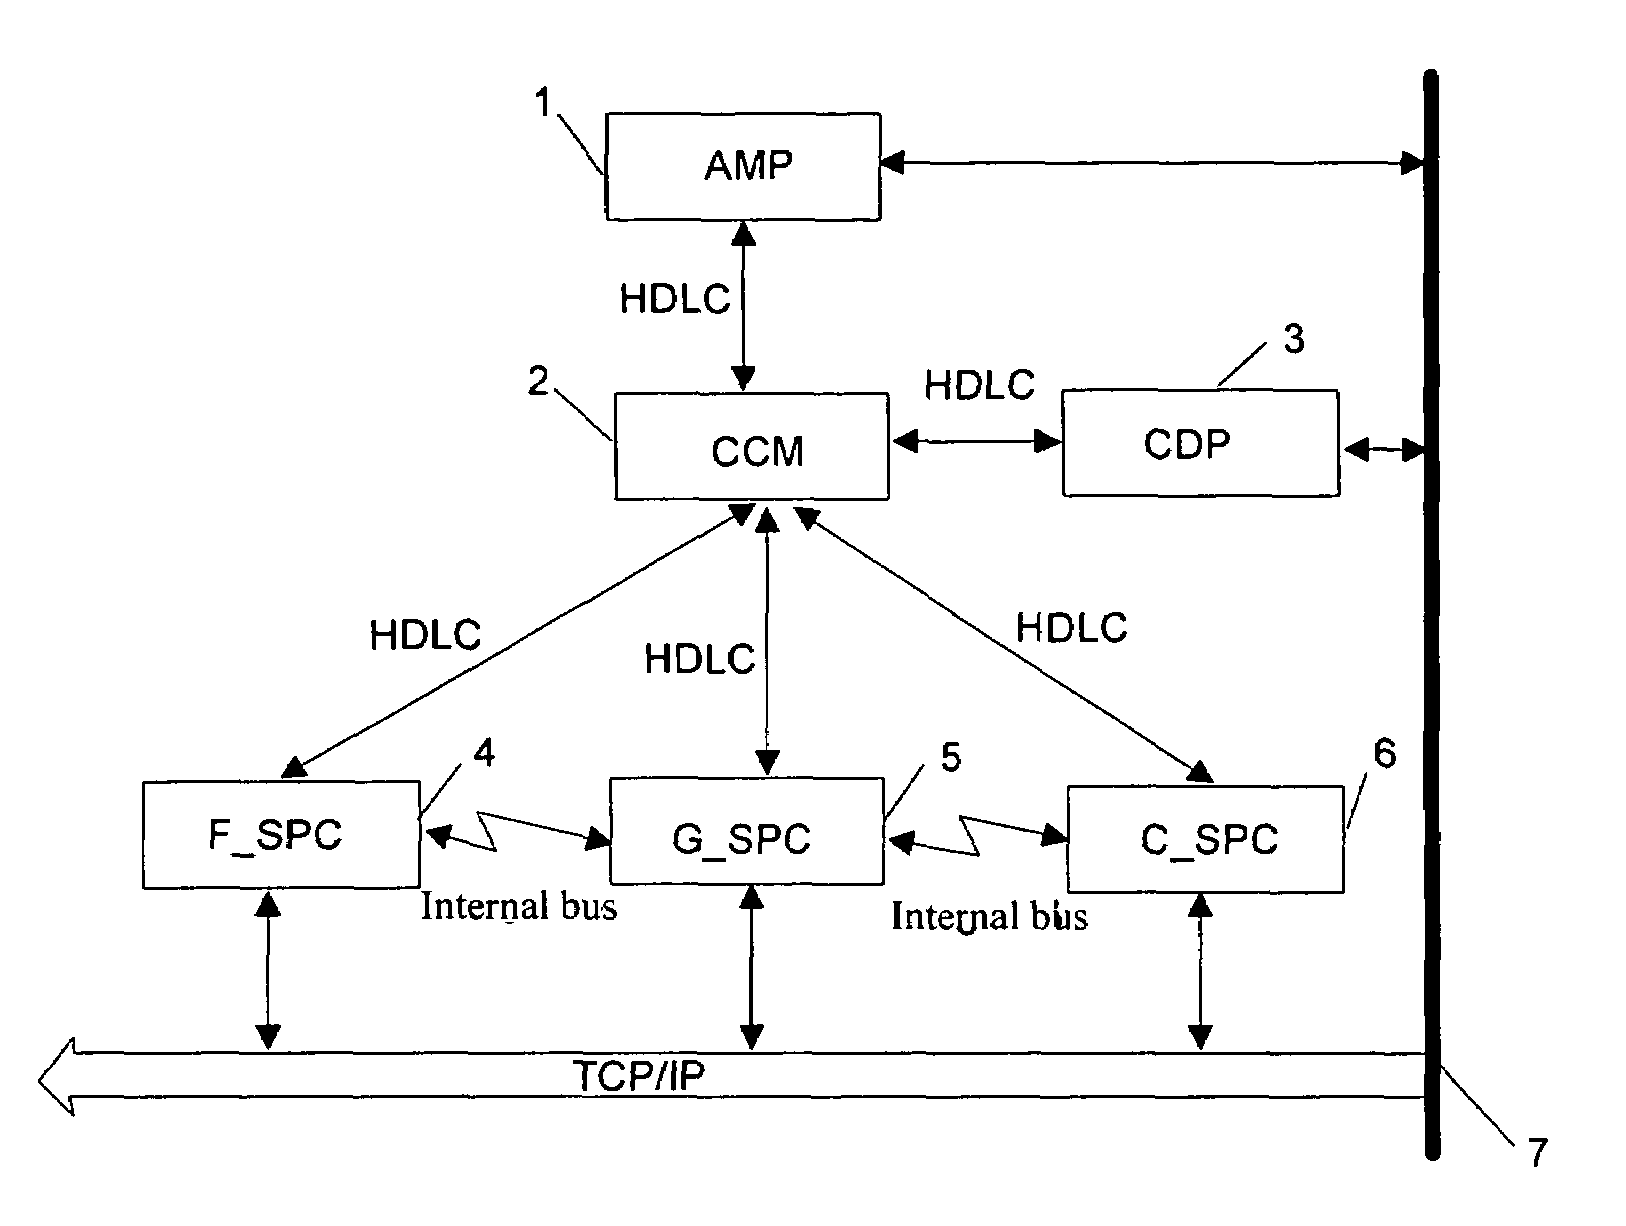 Integrated mobile gateway device used in wireless communication network